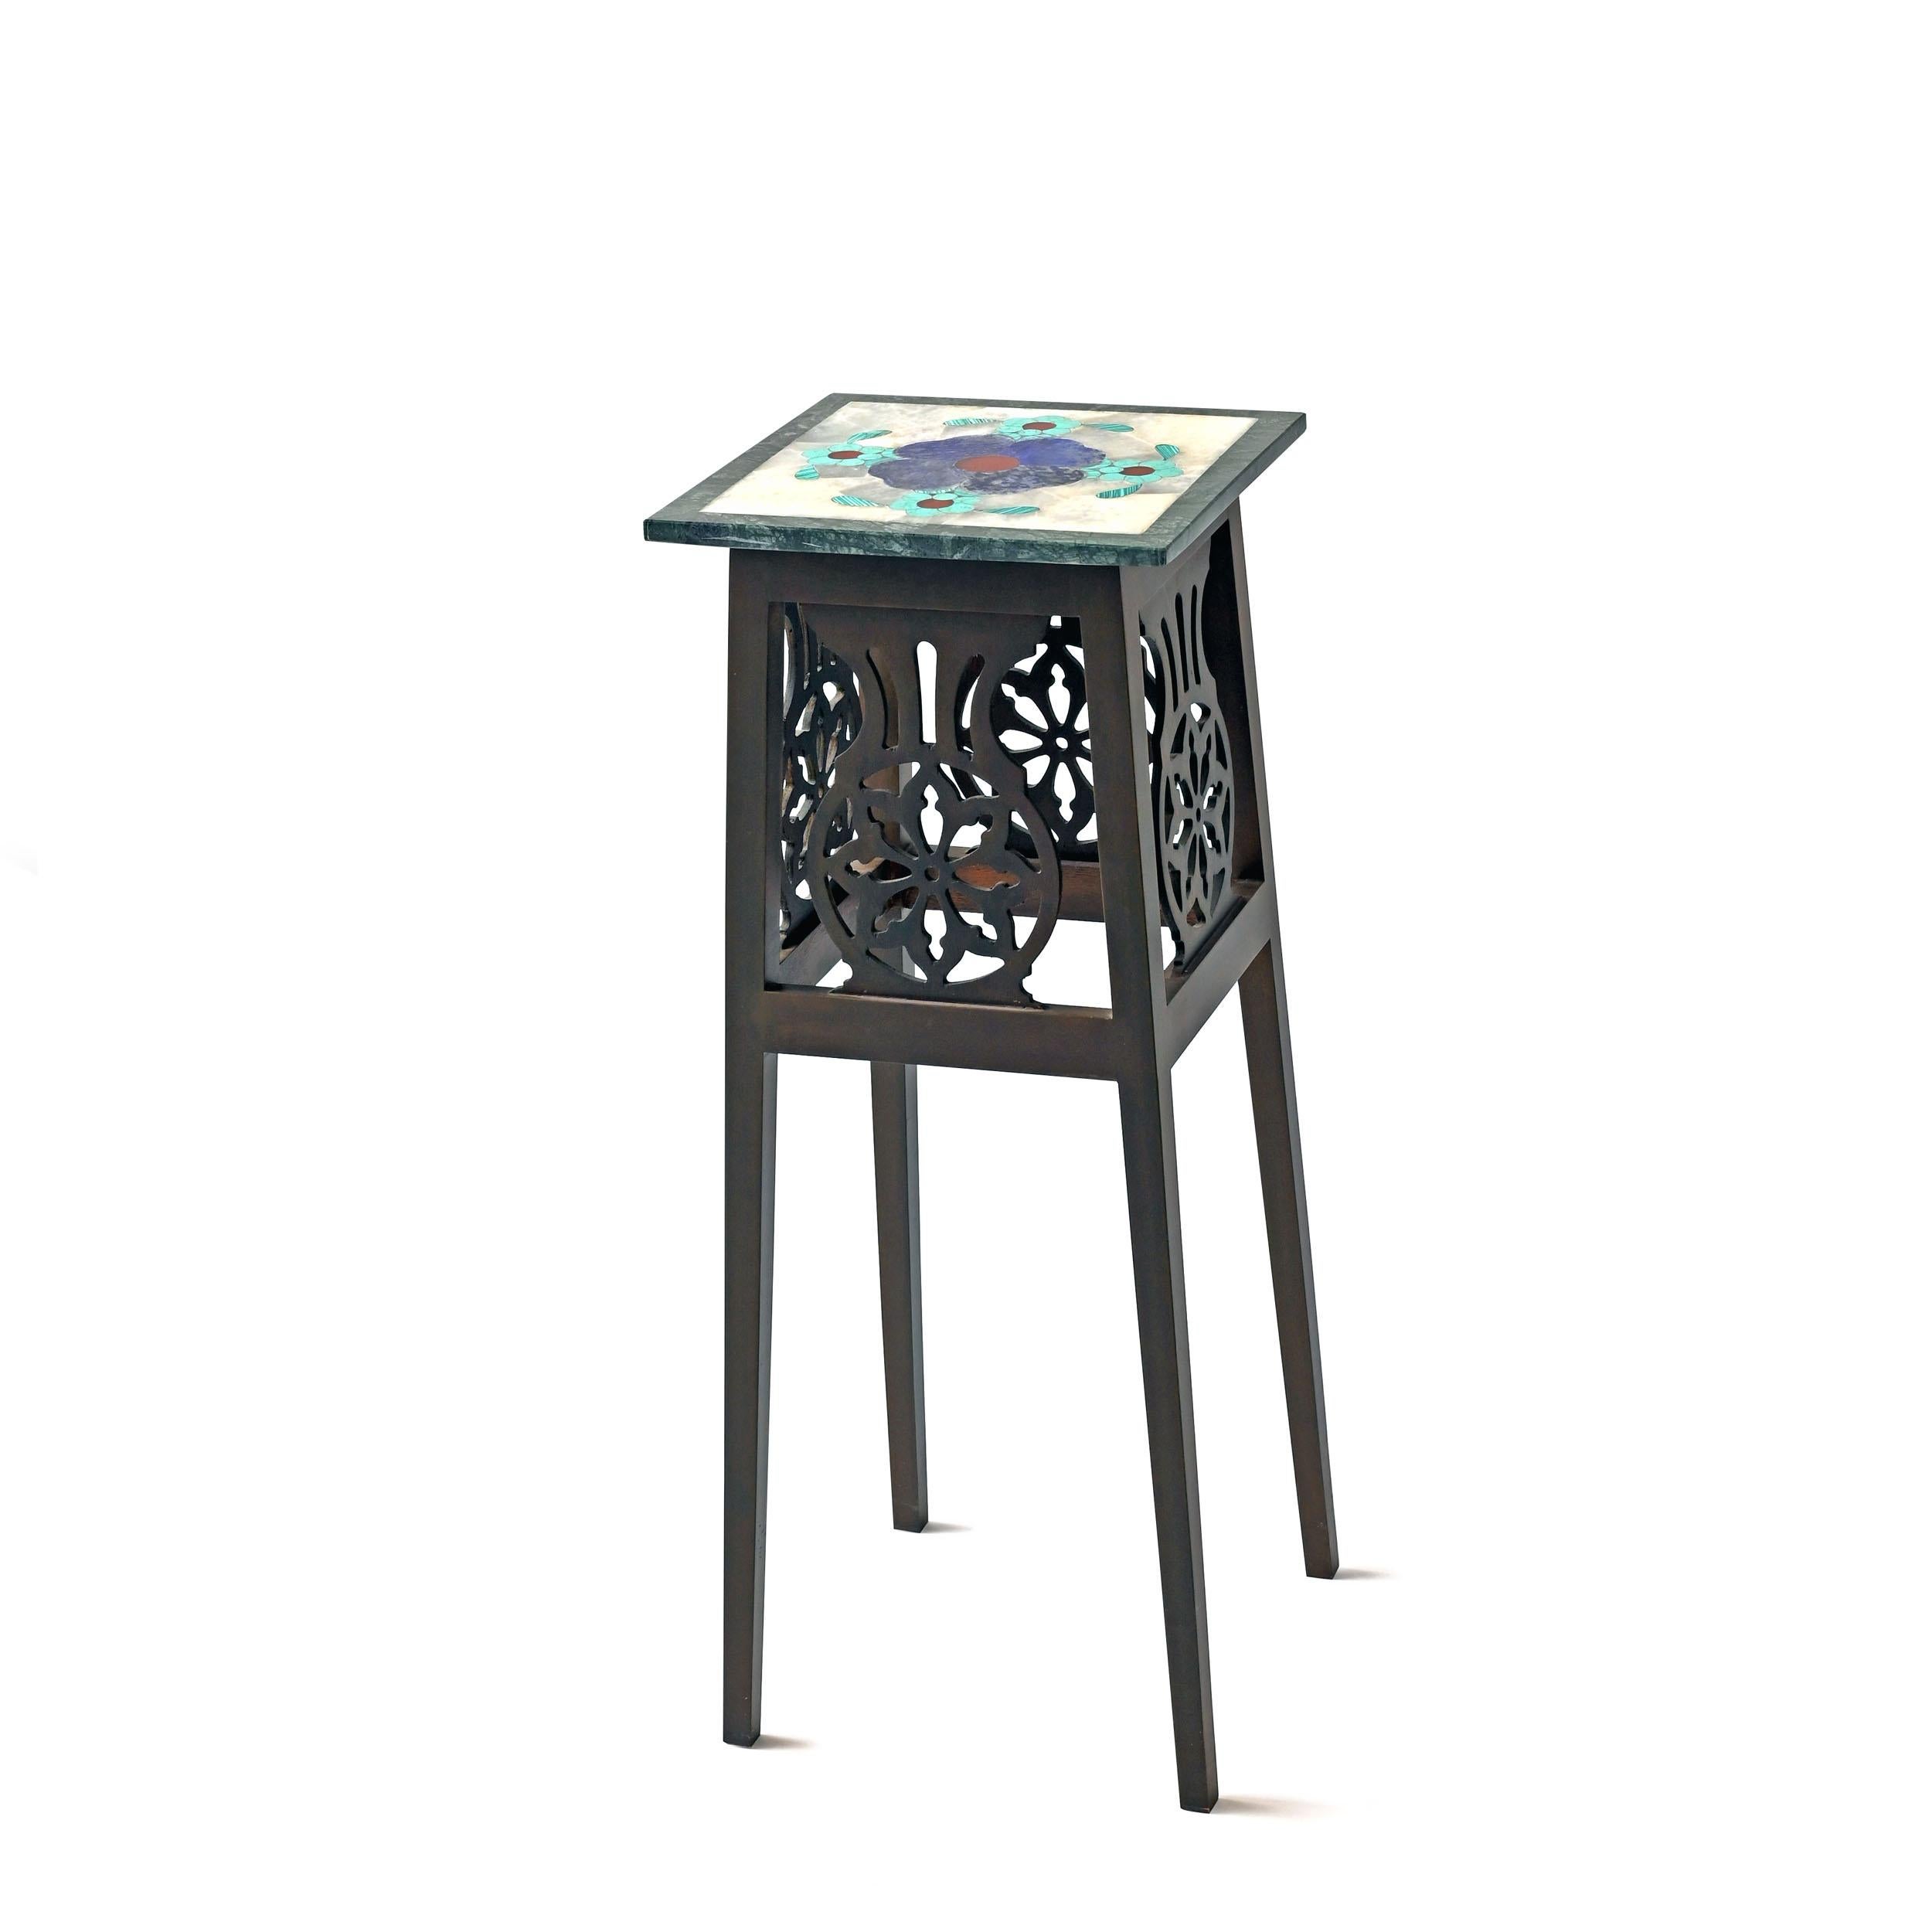 Clove accent table by Studio Lel
Dimensions: W 30.5 x D 30.5 x H 76 cm
Materials: Lapis Lazuli, Amazonite, Malachite, Onyx, Marble, Wood

These are handmade from semiprecious stone and marble in a small artisanal workshop. Please note that